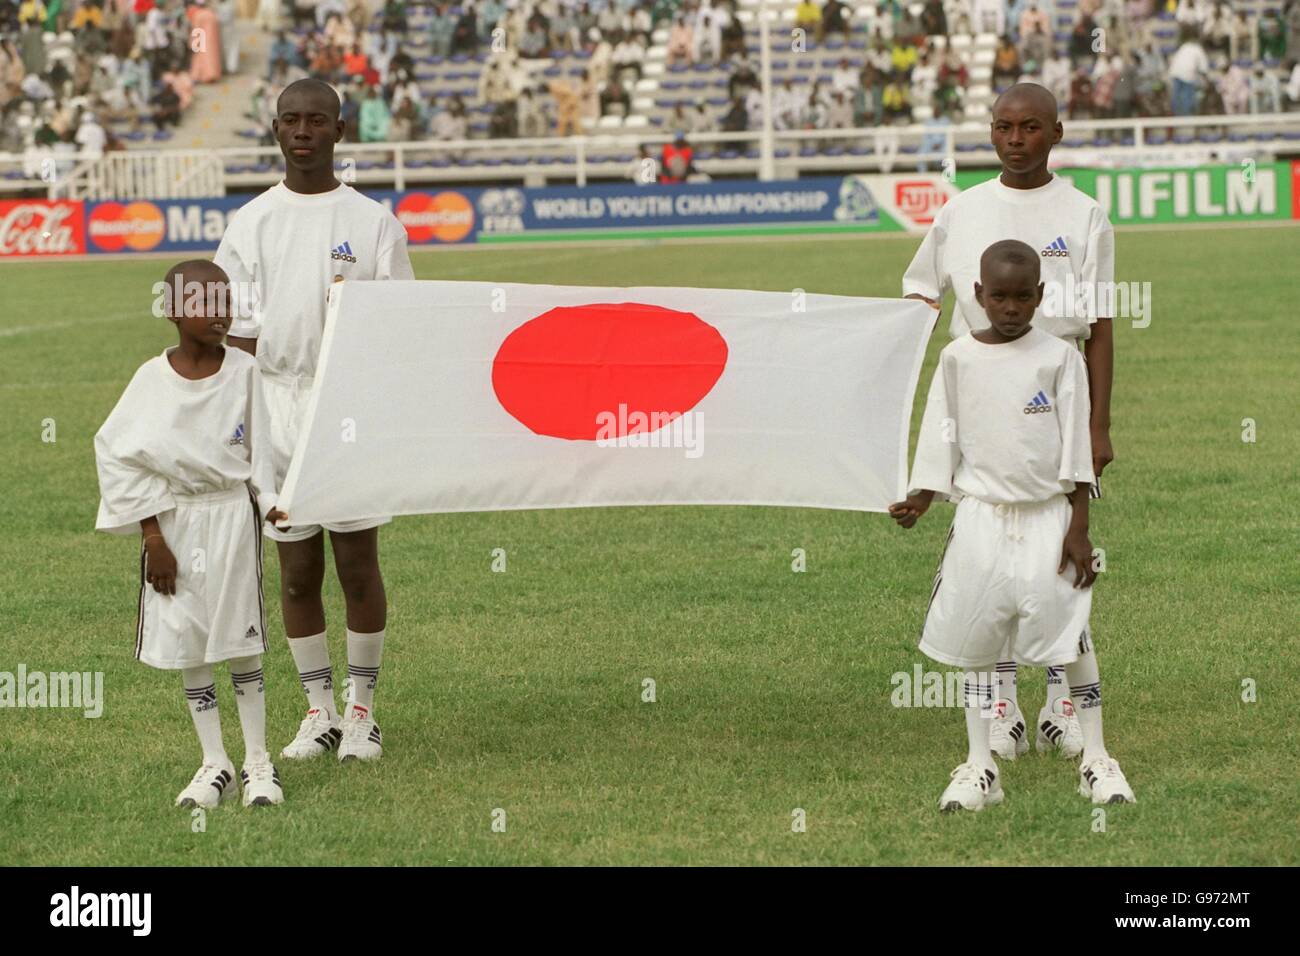 Soccer - World Youth Cup - Group E - Cameroon v Japan. Nigerian children holding the flag of Japan Stock Photo